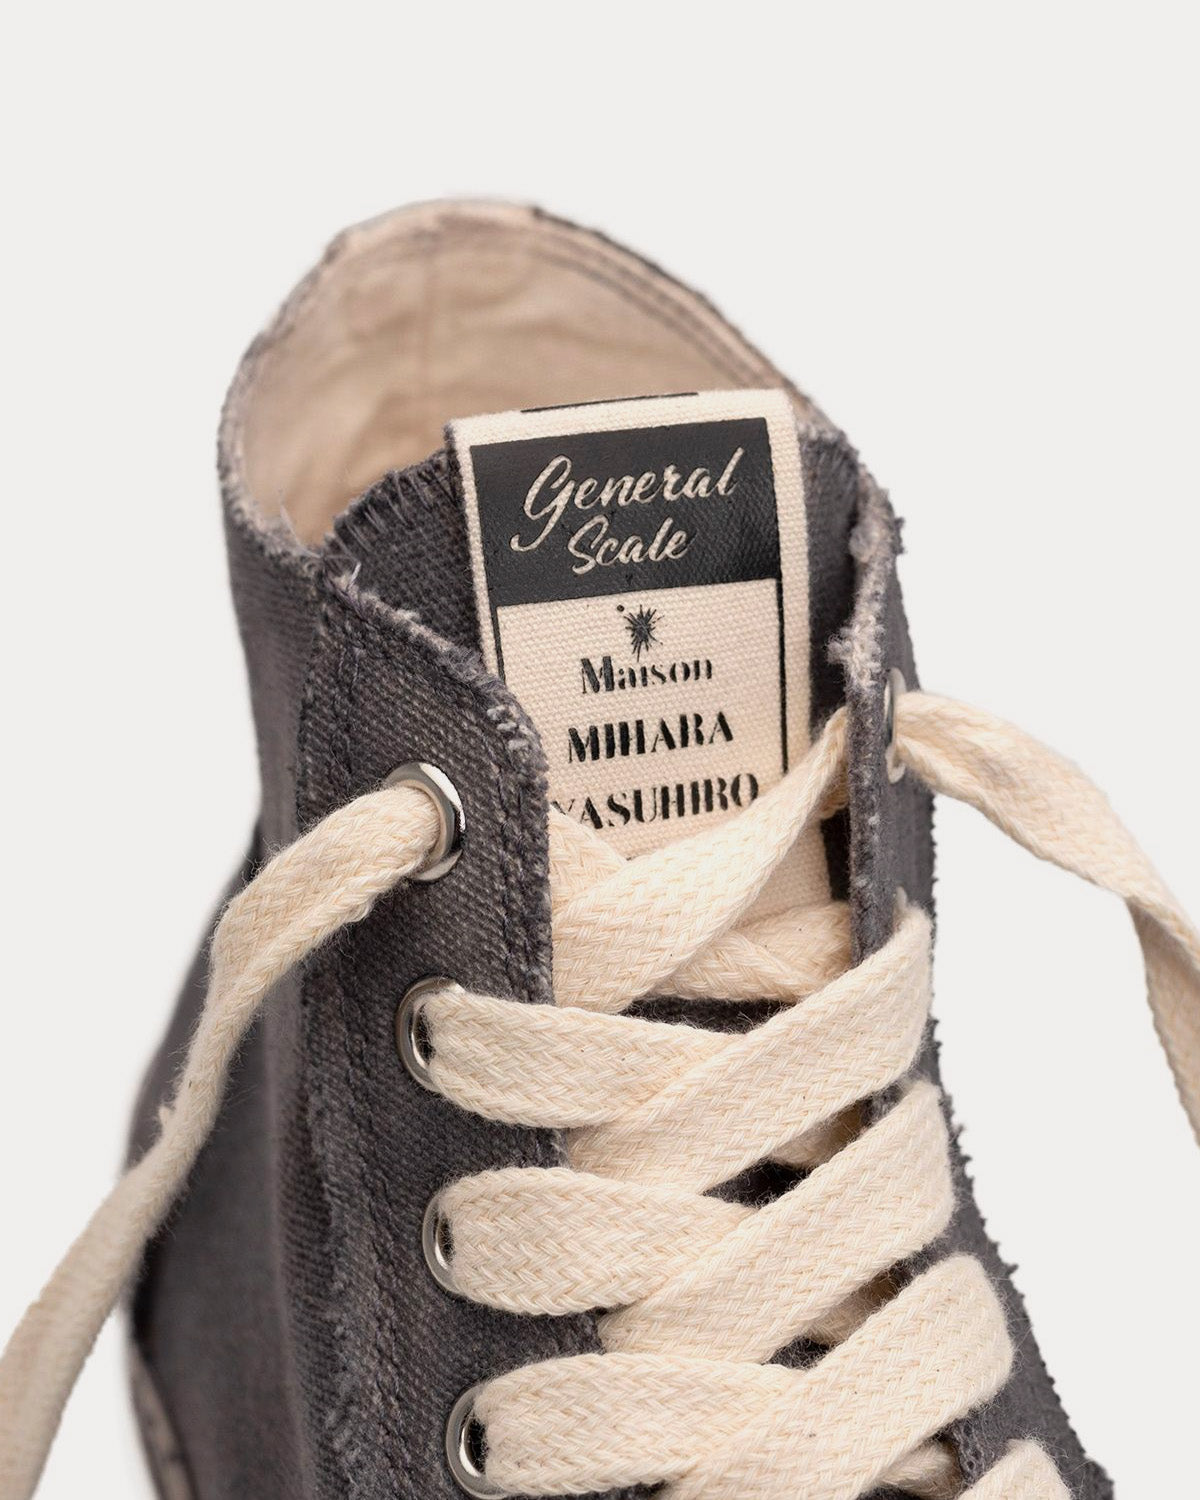 General Scale By Maison Mihara Yasuhiro - Past Sole Overdyed Canvas Black High Top Sneakers